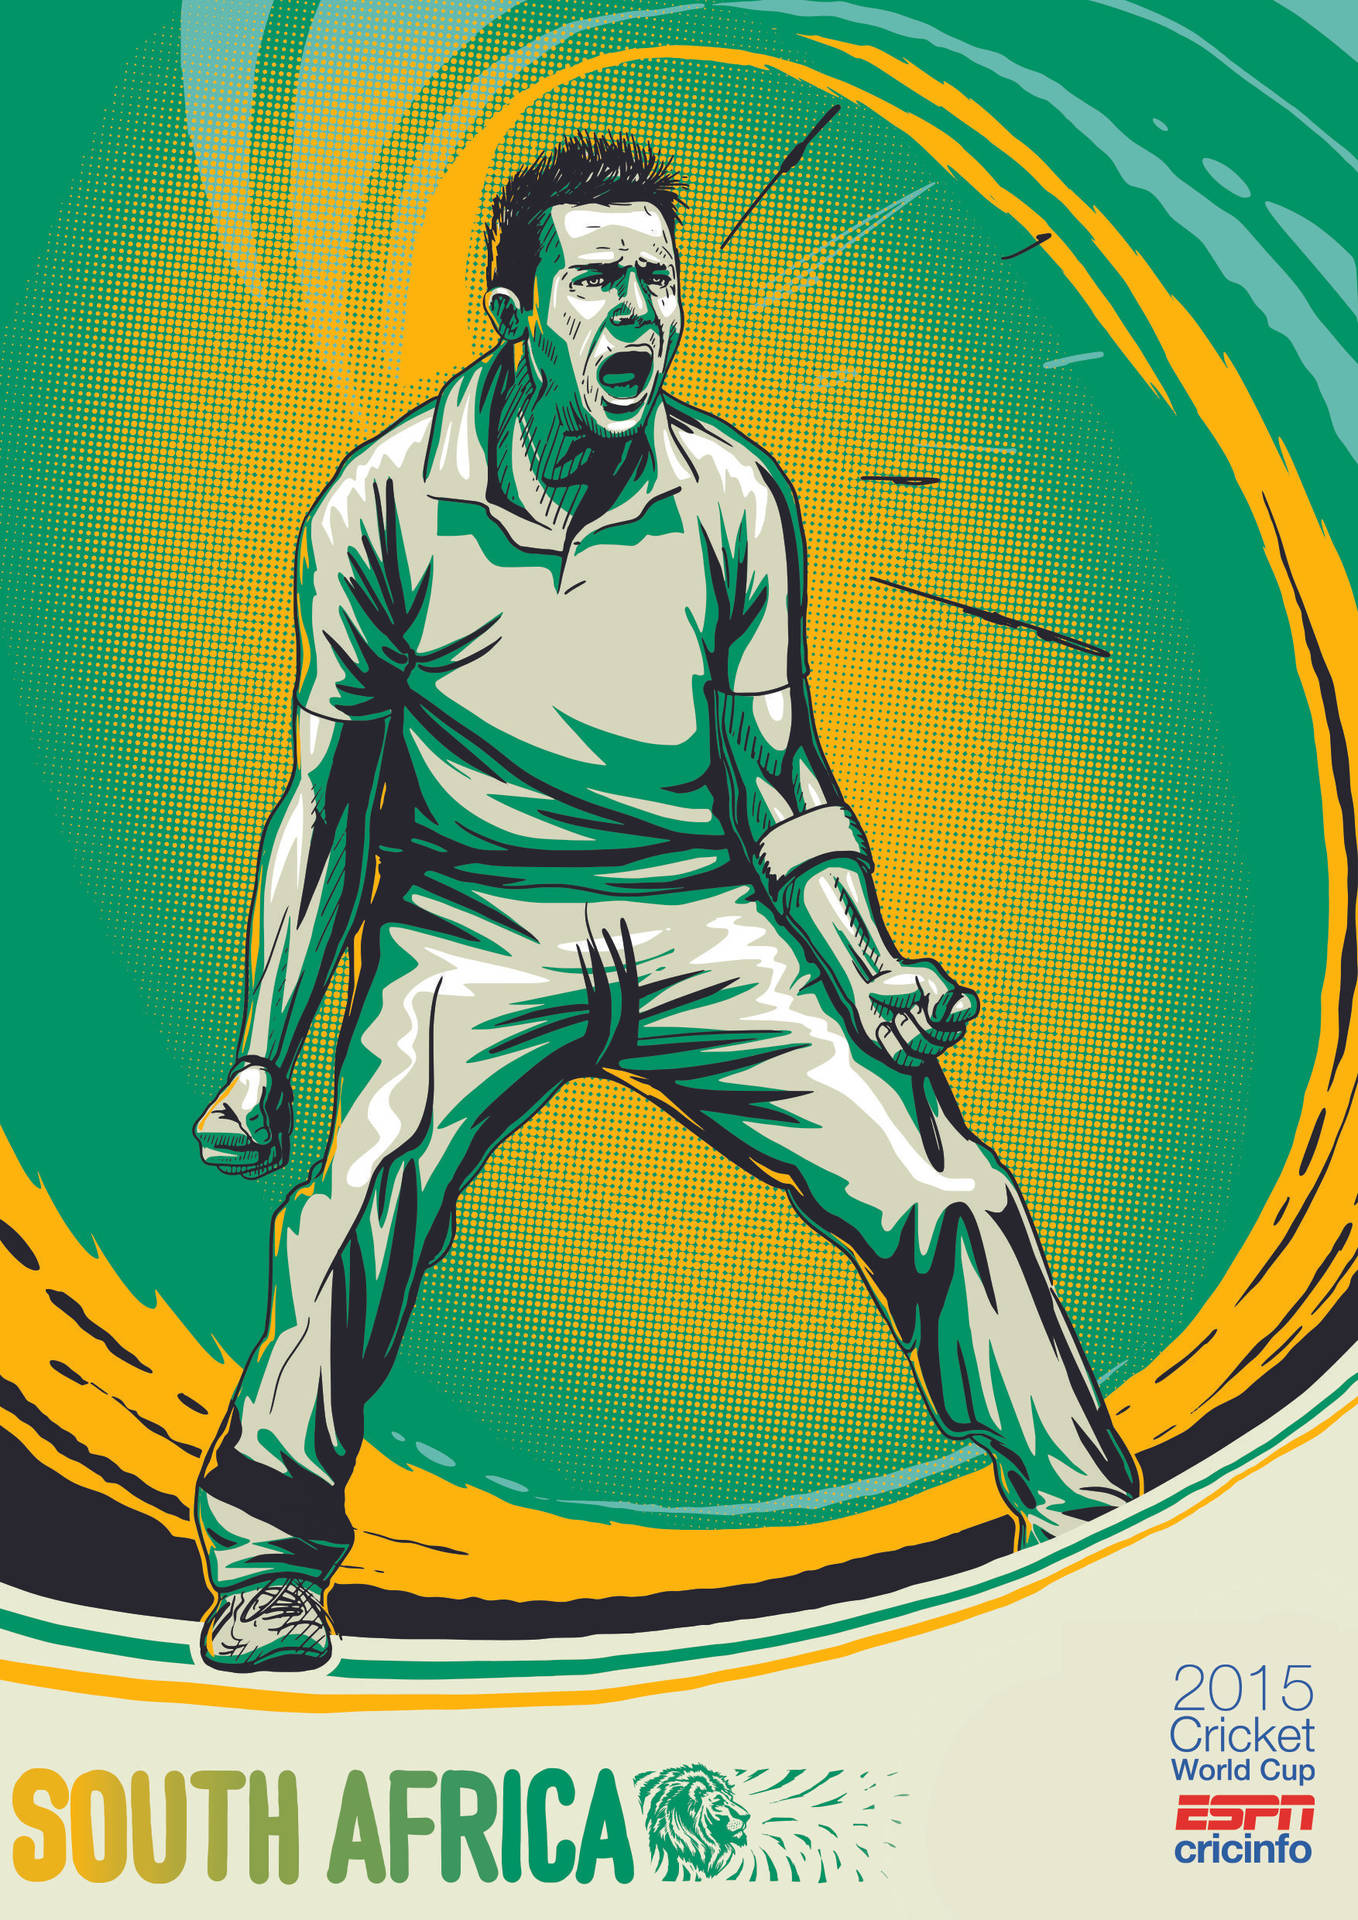 South Africa Cricket World Cup Poster